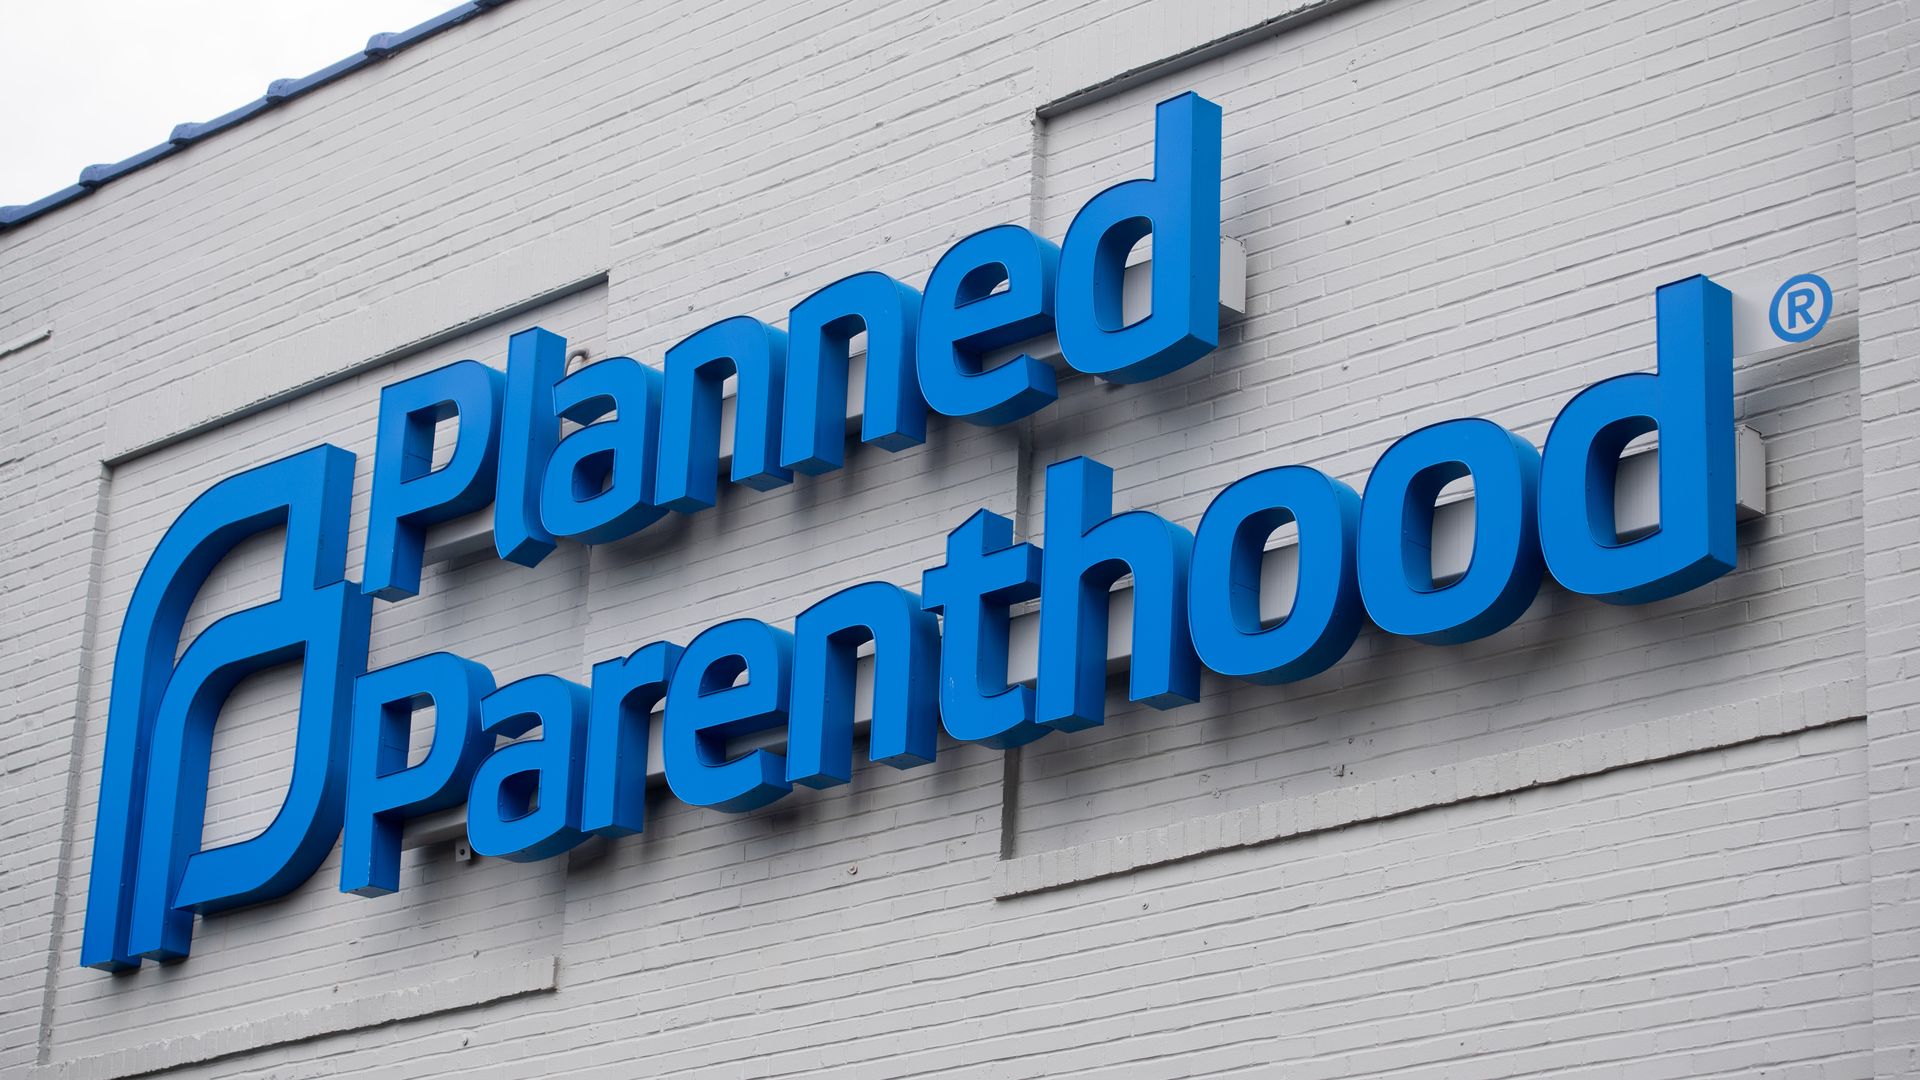 The blue Planned Parenthood logo is seen on a grey, brick building of a Planned Parenthood Reproductive Health Services Center.